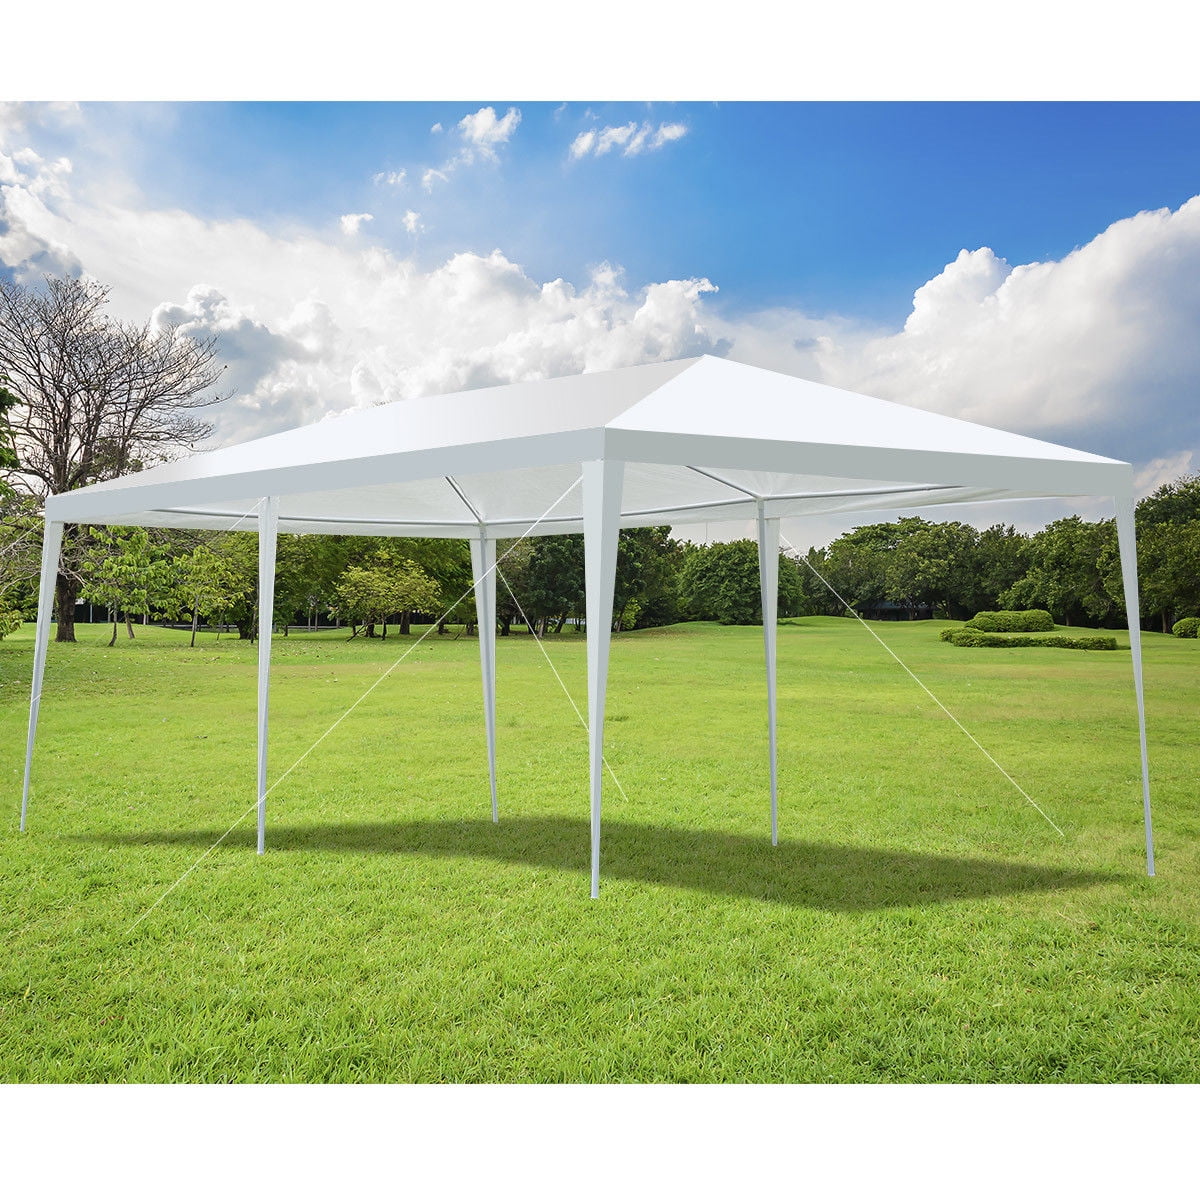 10'x20' Summer Outdoor Gazebo Pavilion Cater Events Canopy Party Wedding Tent 